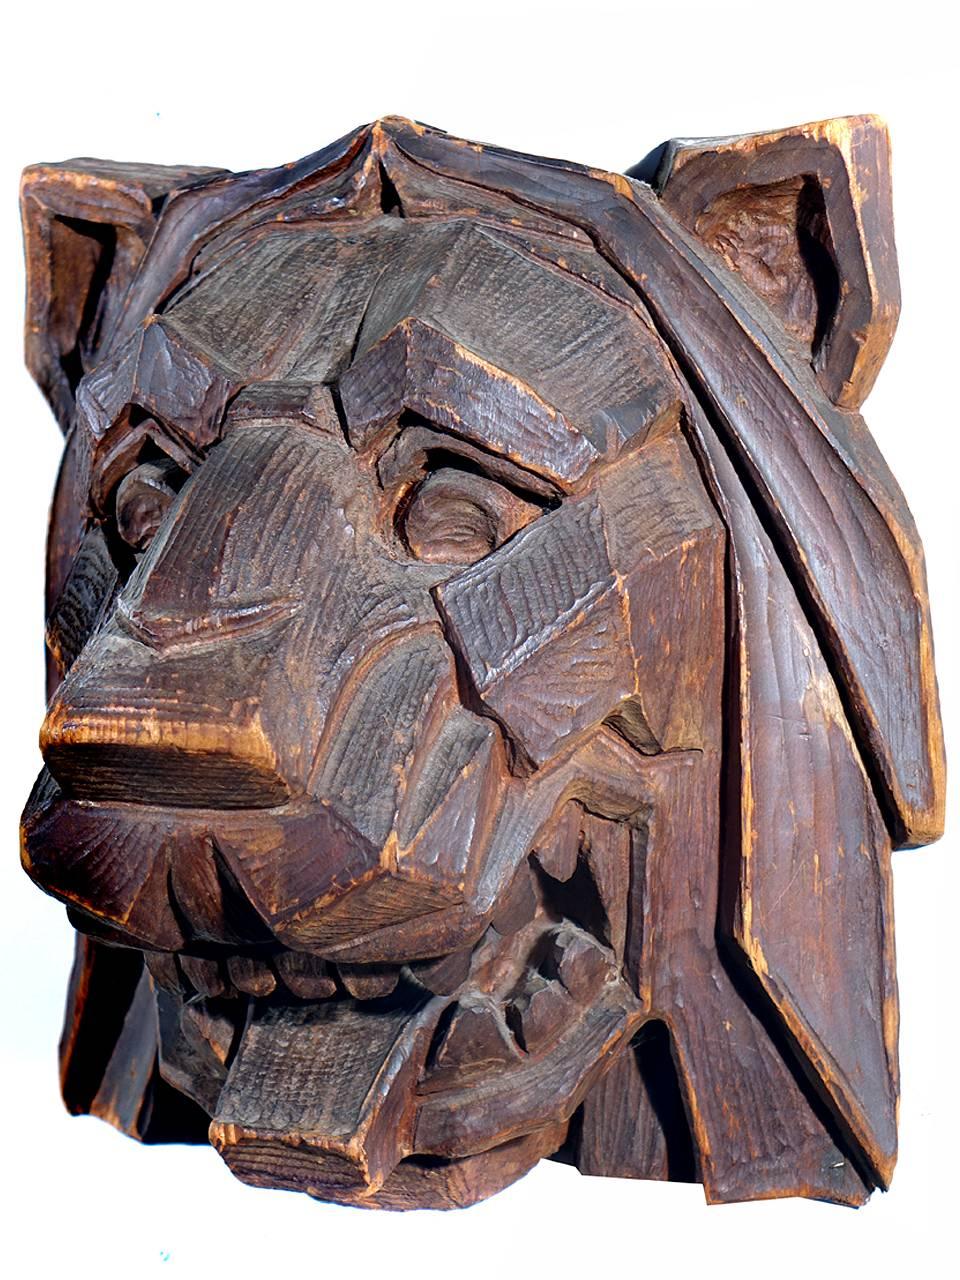 We recently acquired a small group of early Folk Art from the estate of a long time collector and dealer. Of all the objects this Lion is the one we were most drawn to. Its carved in a Classic and severe deco style. It's also so well done it could